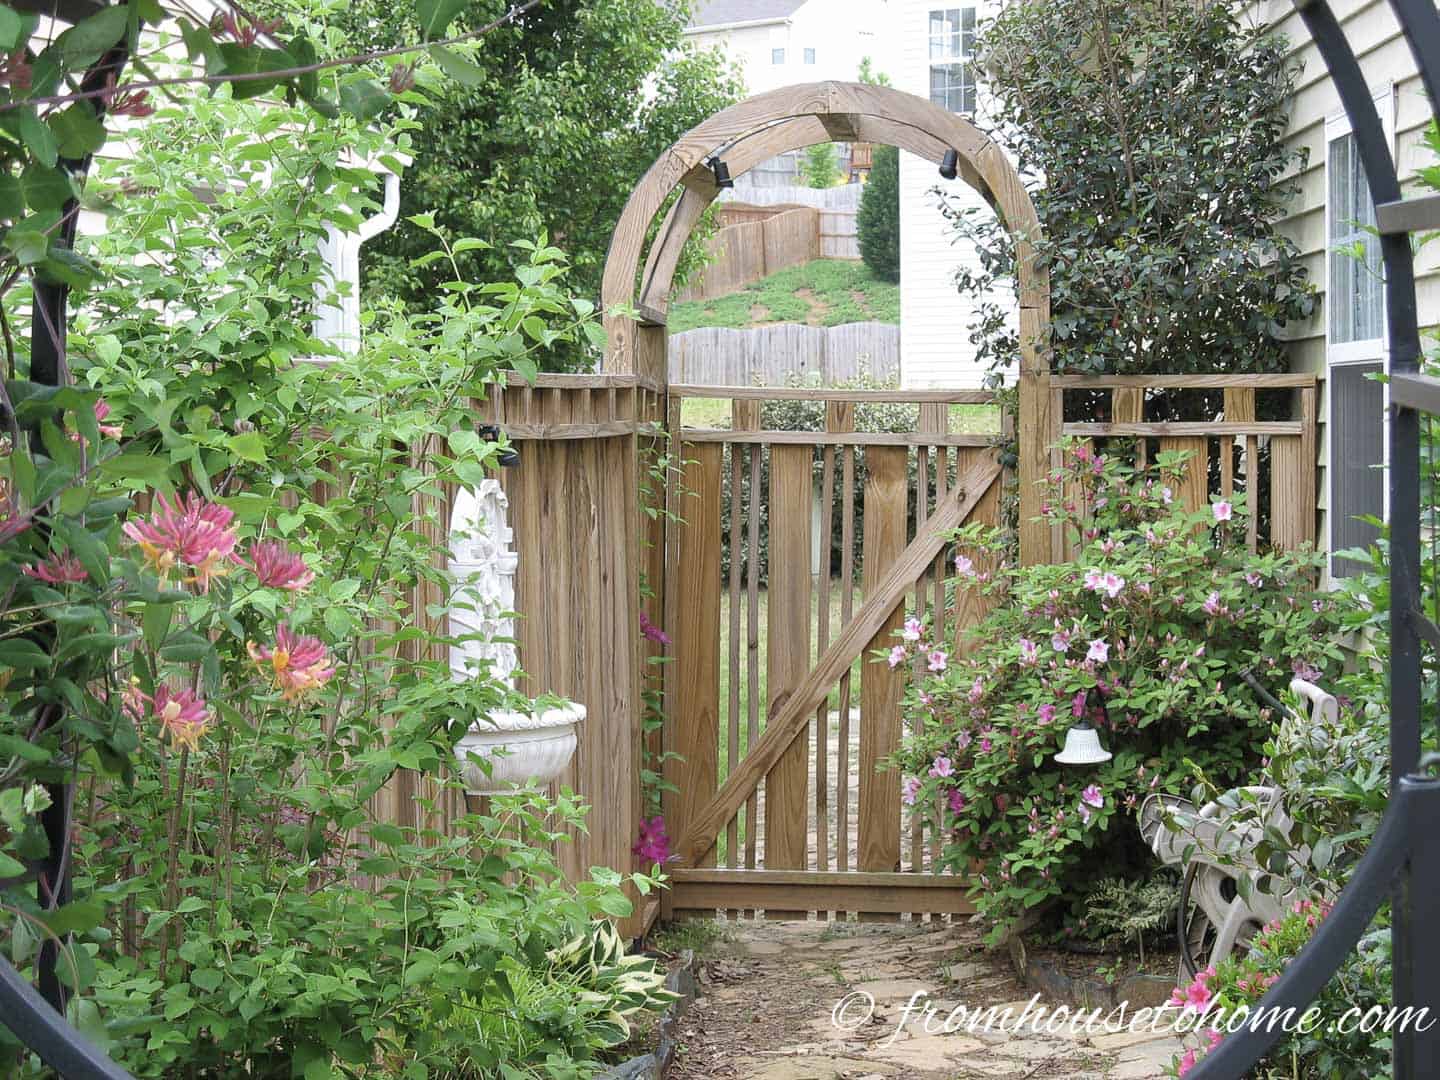 Wood fence gate with an arch arbor at the entrance of the garden